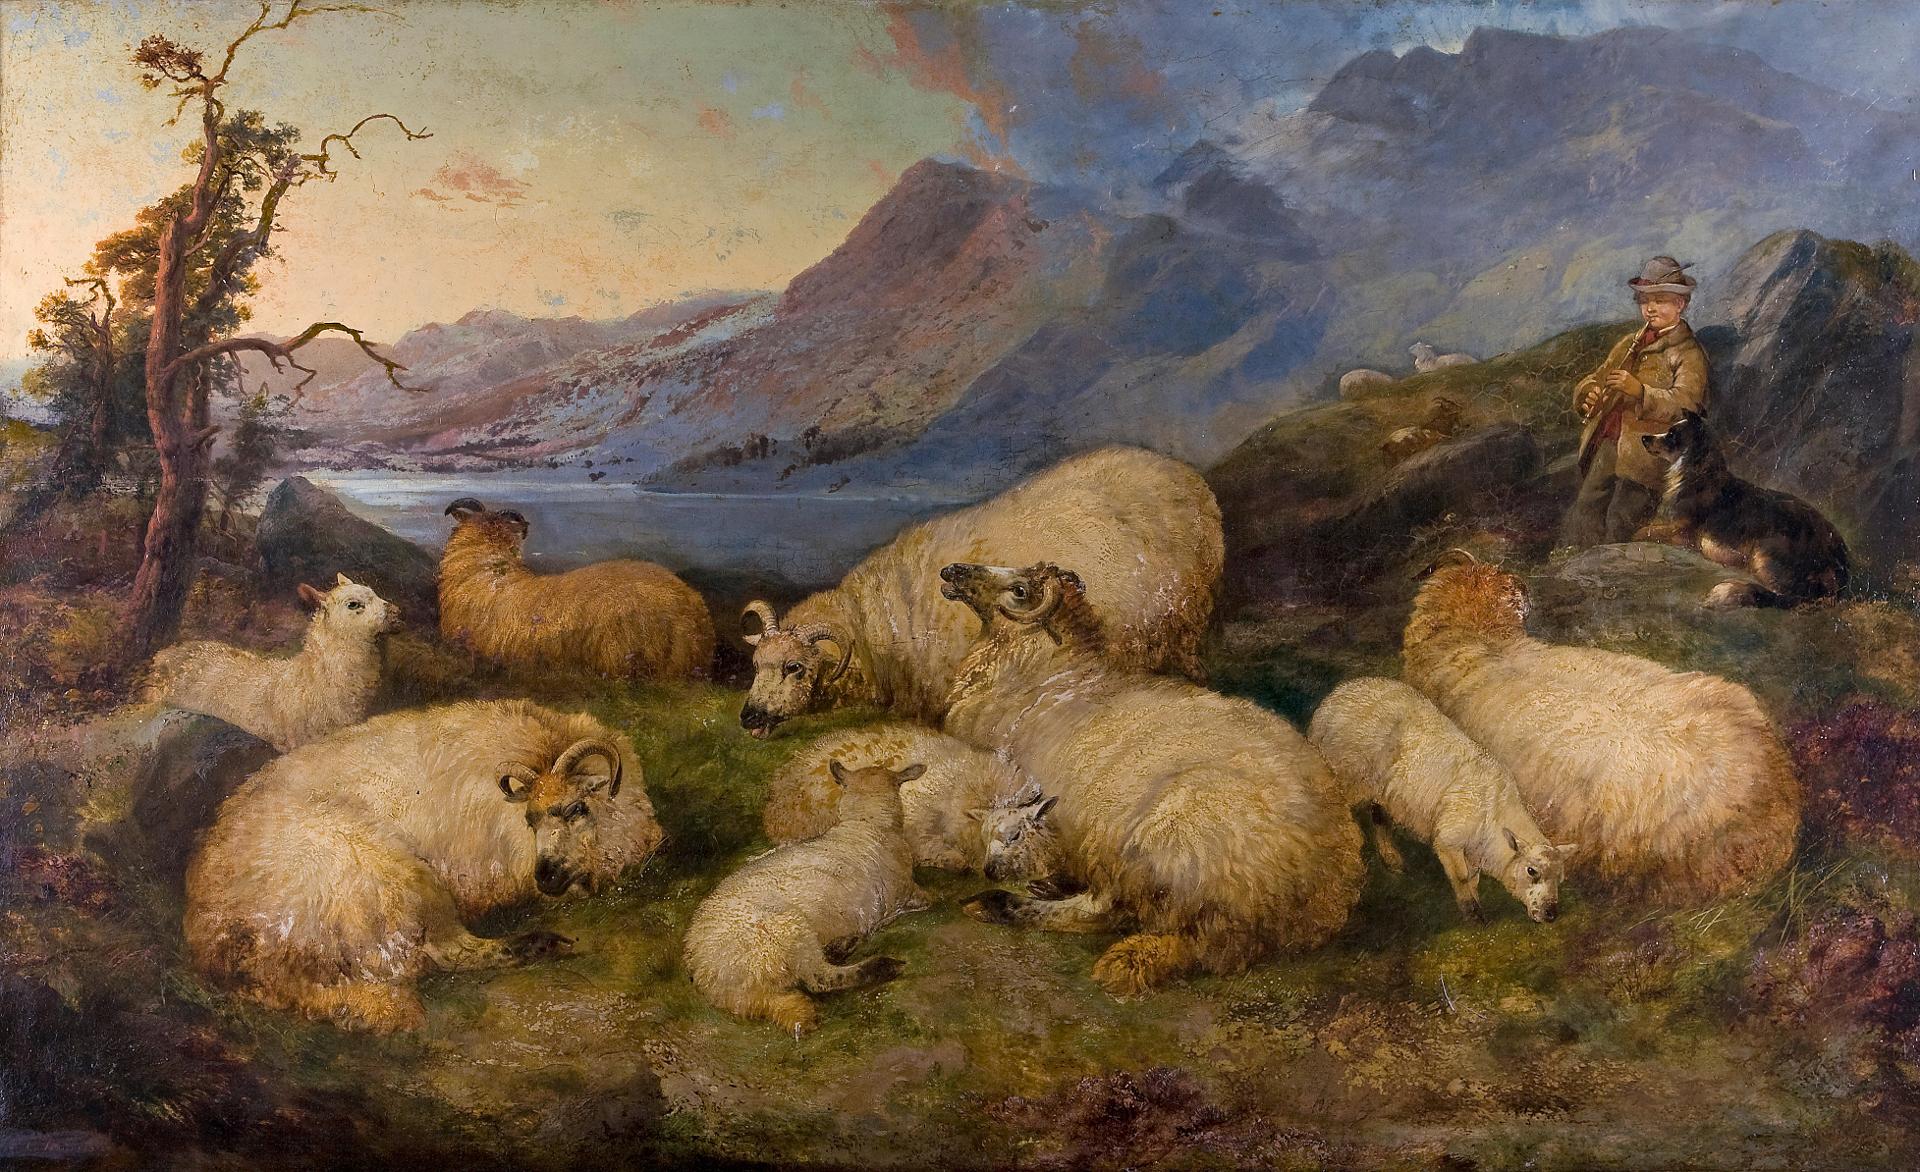 James Charles Morris - Shepherd boy with his flock in the highlands